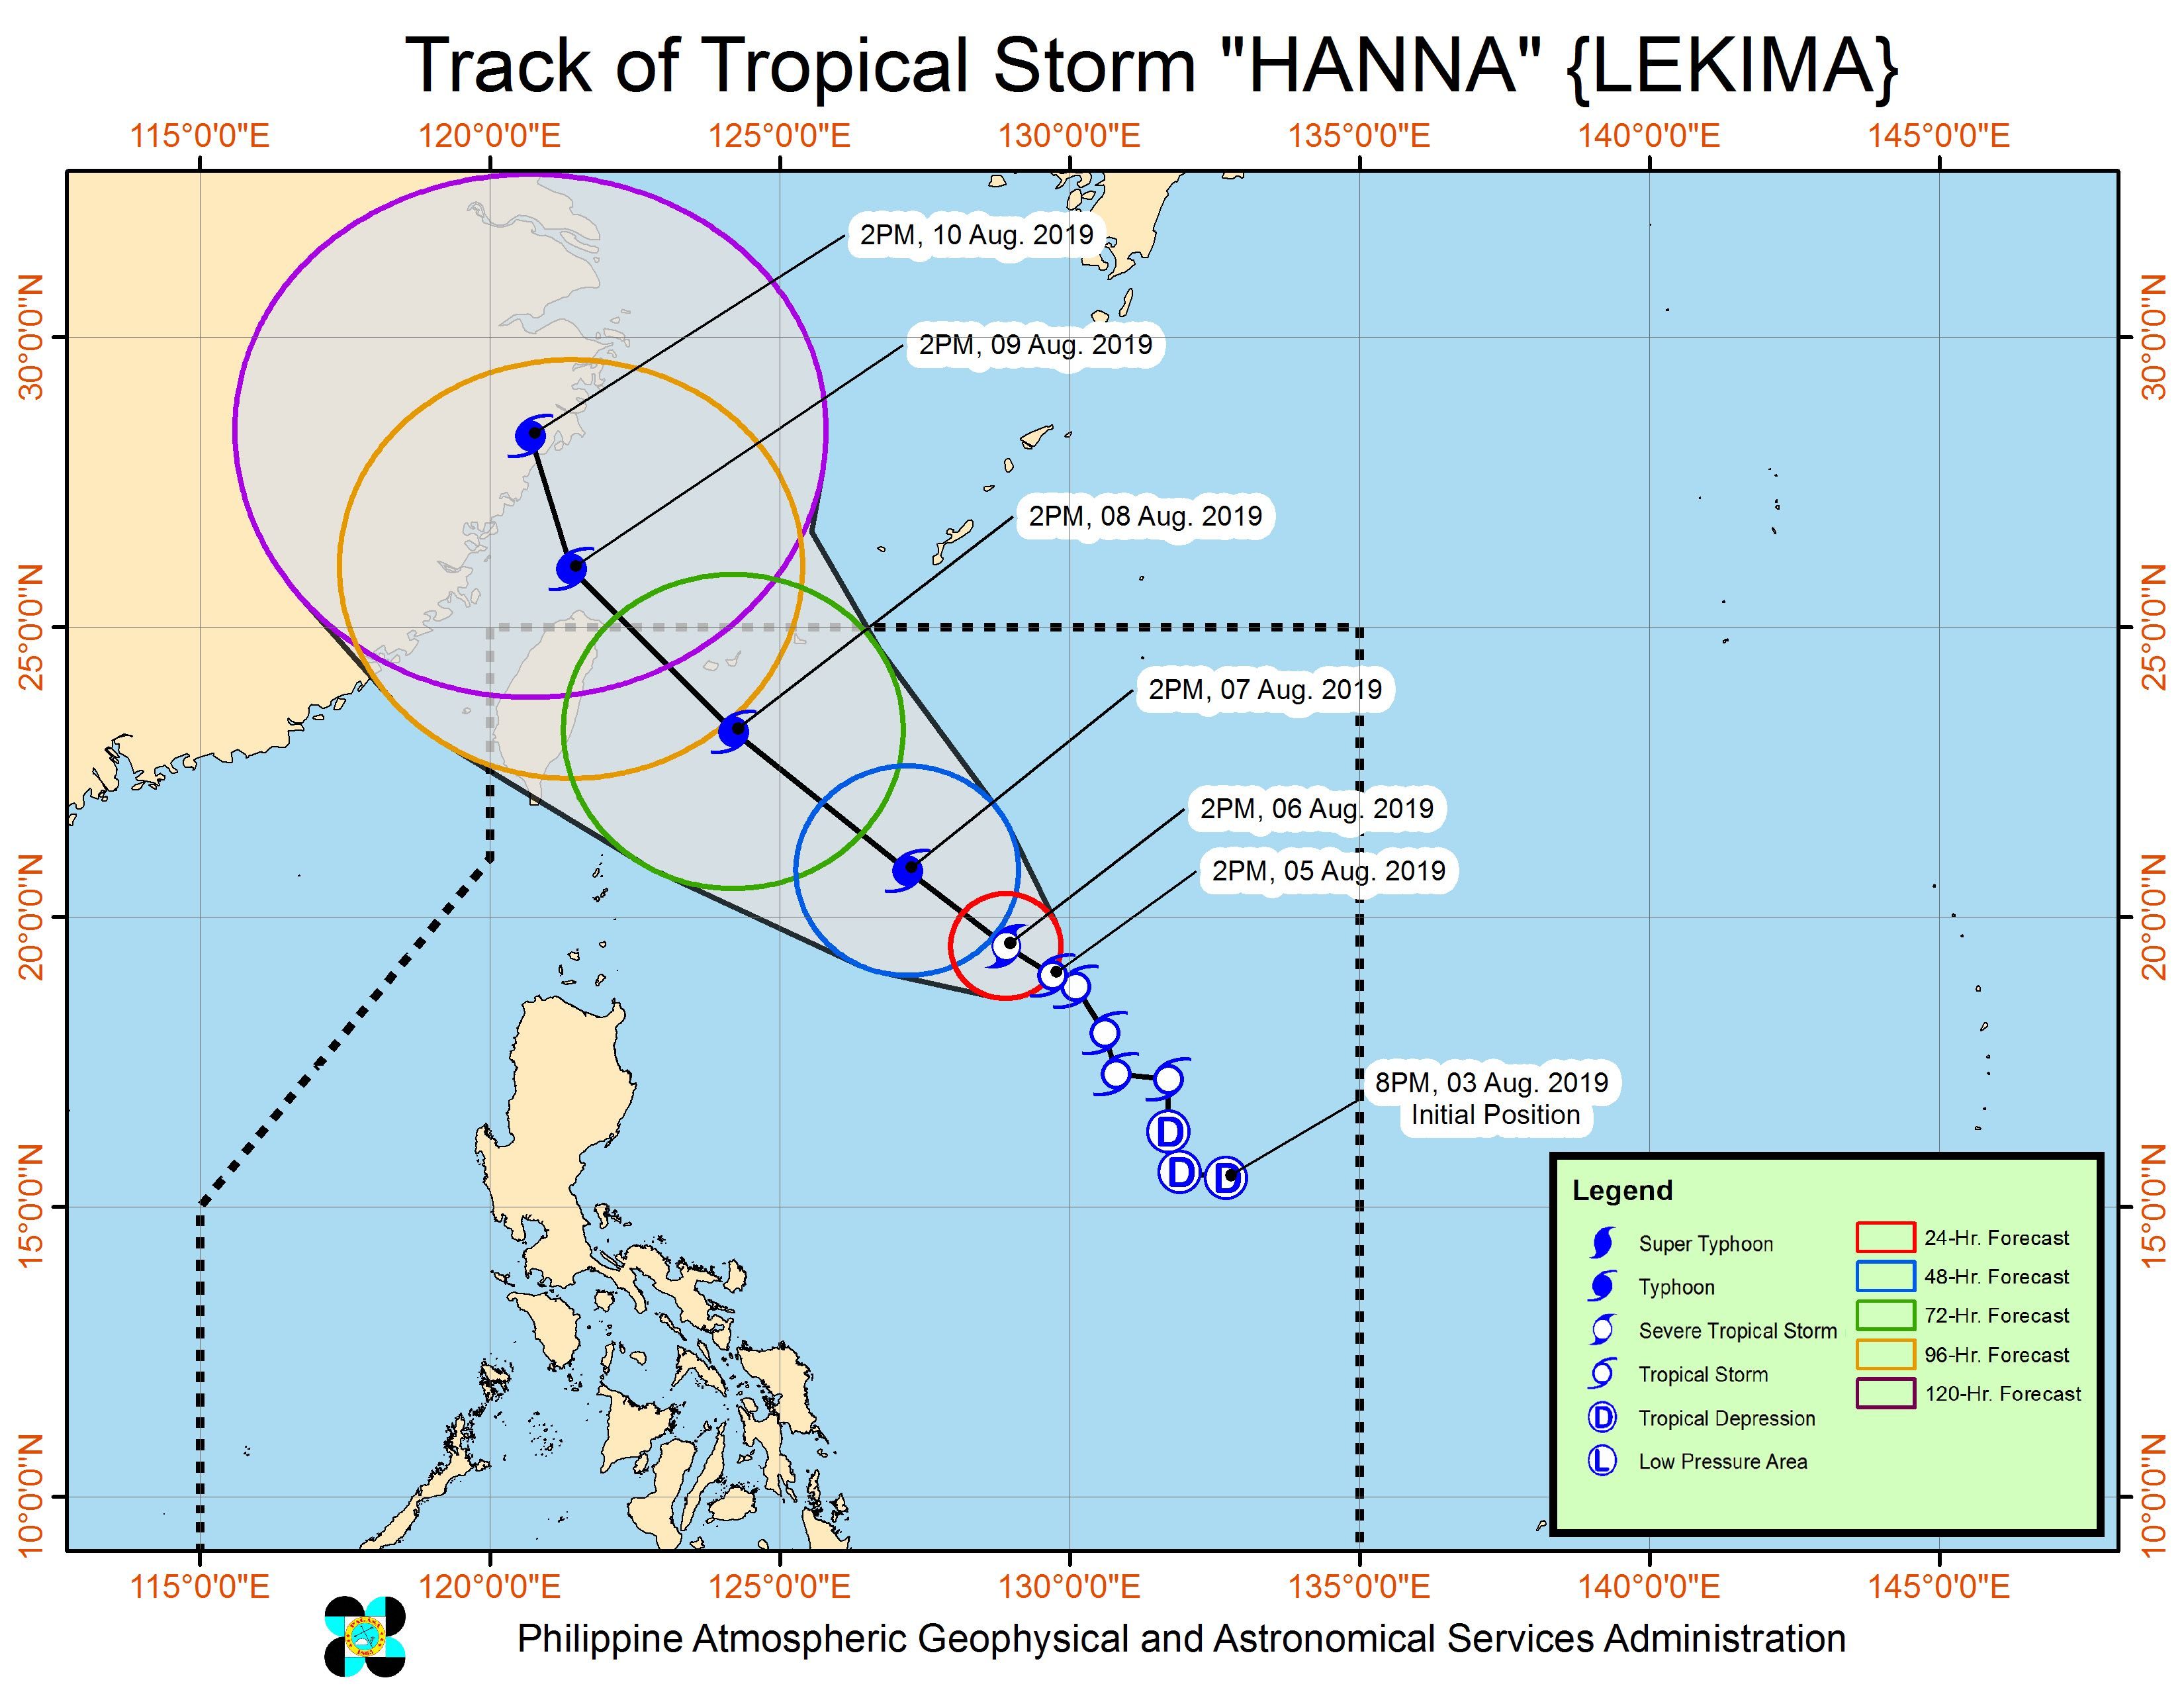 Forecast track of Tropical Storm Hanna (Lekima) as of August 5, 2019, 5 pm. Image from PAGASA 